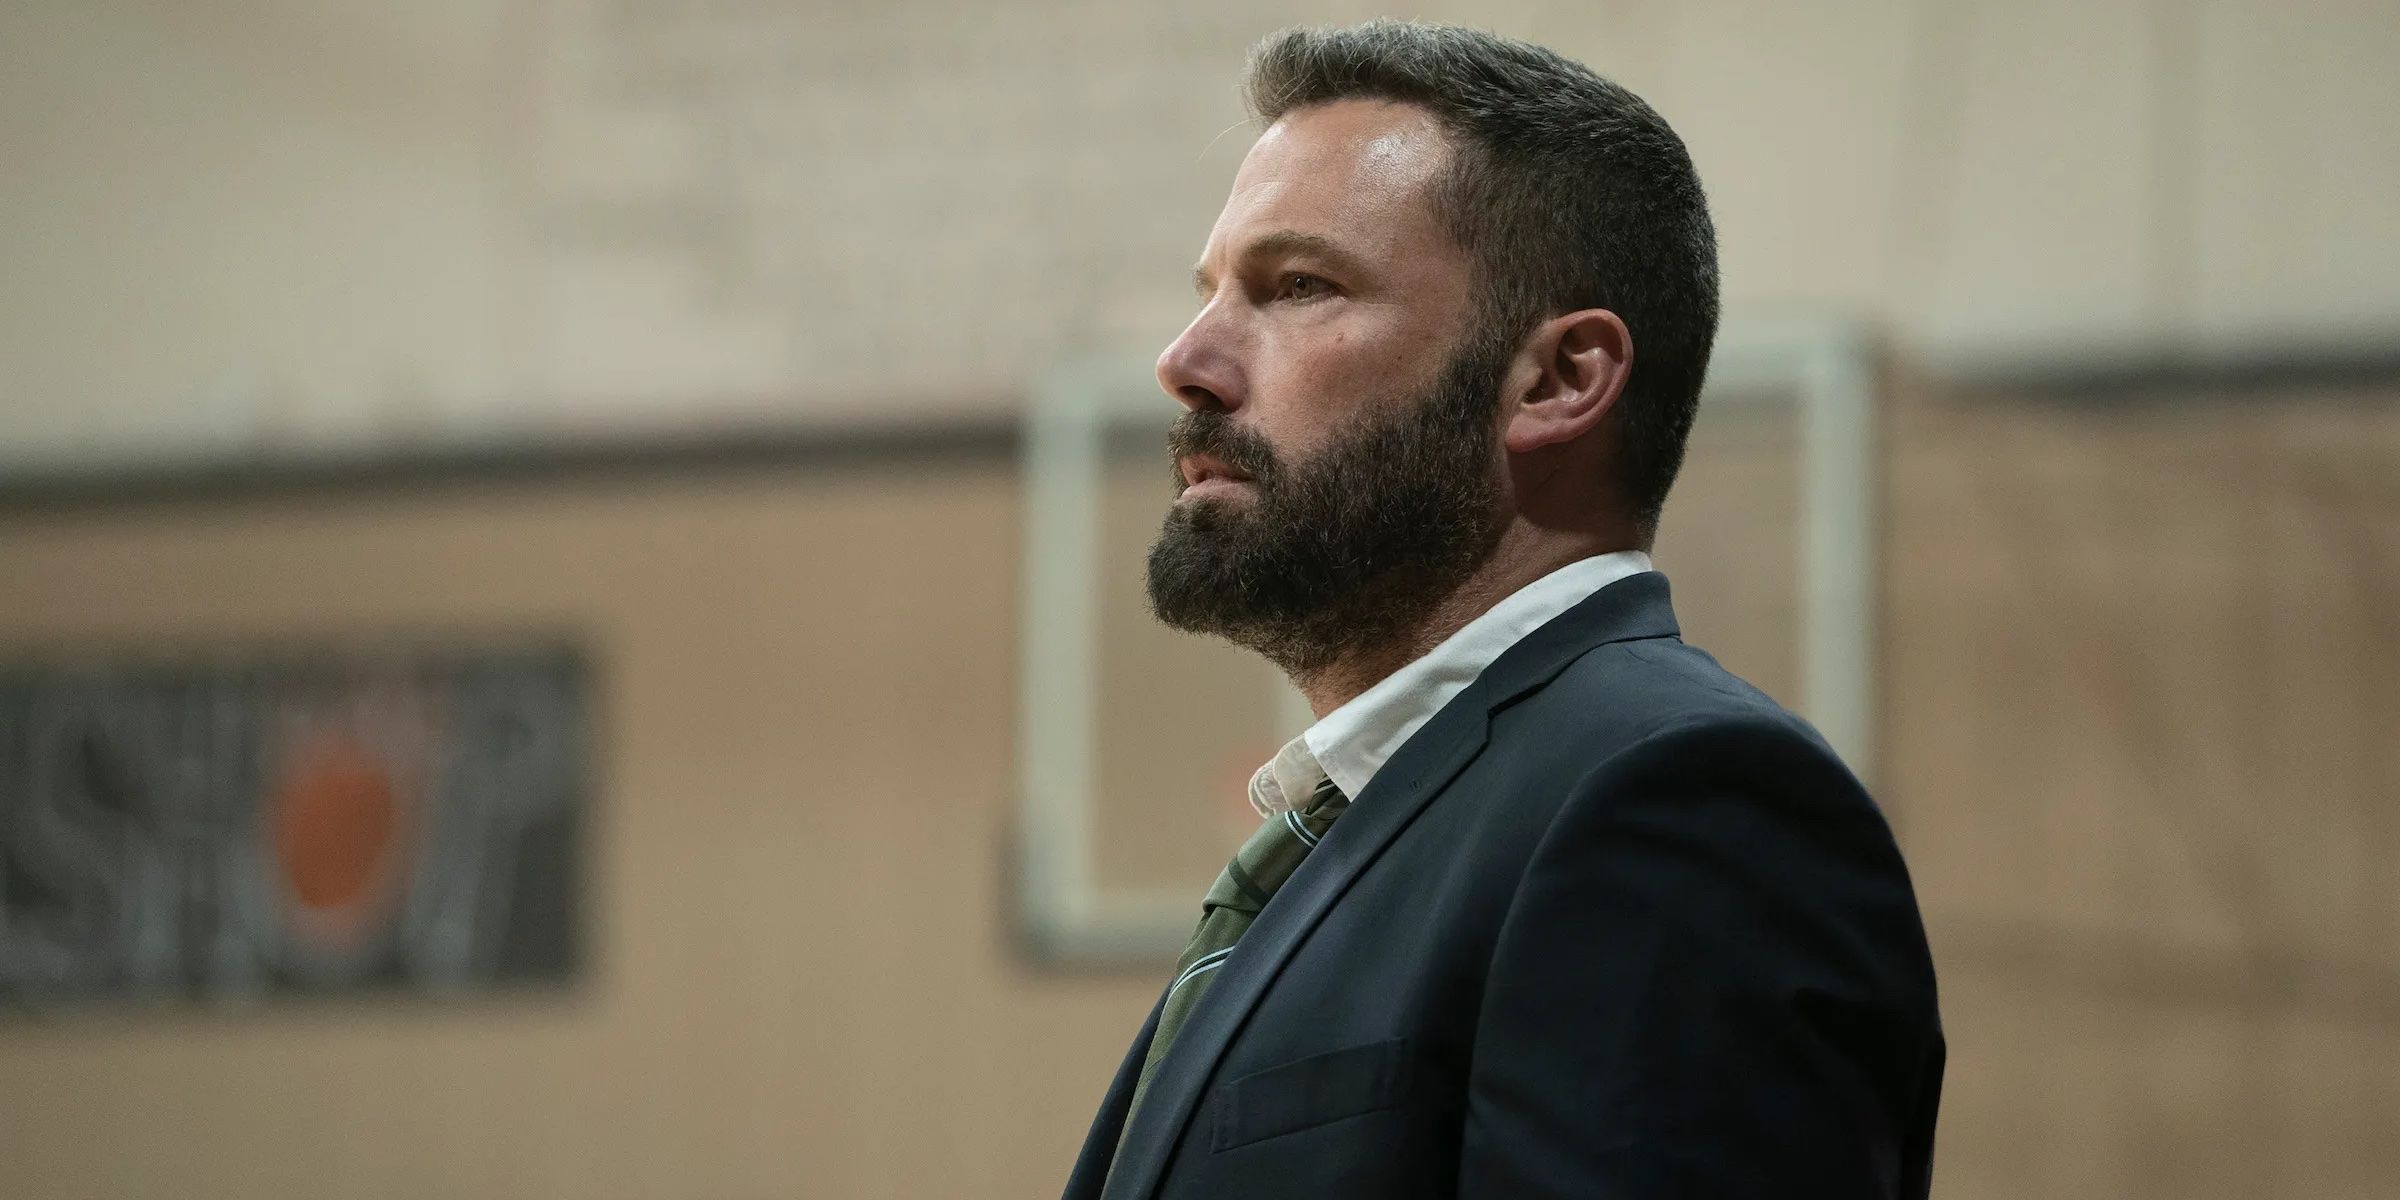 This Movie With 84% On RT Sets The Bar Very High For Ben Affleck's Upcoming $155M Sequel